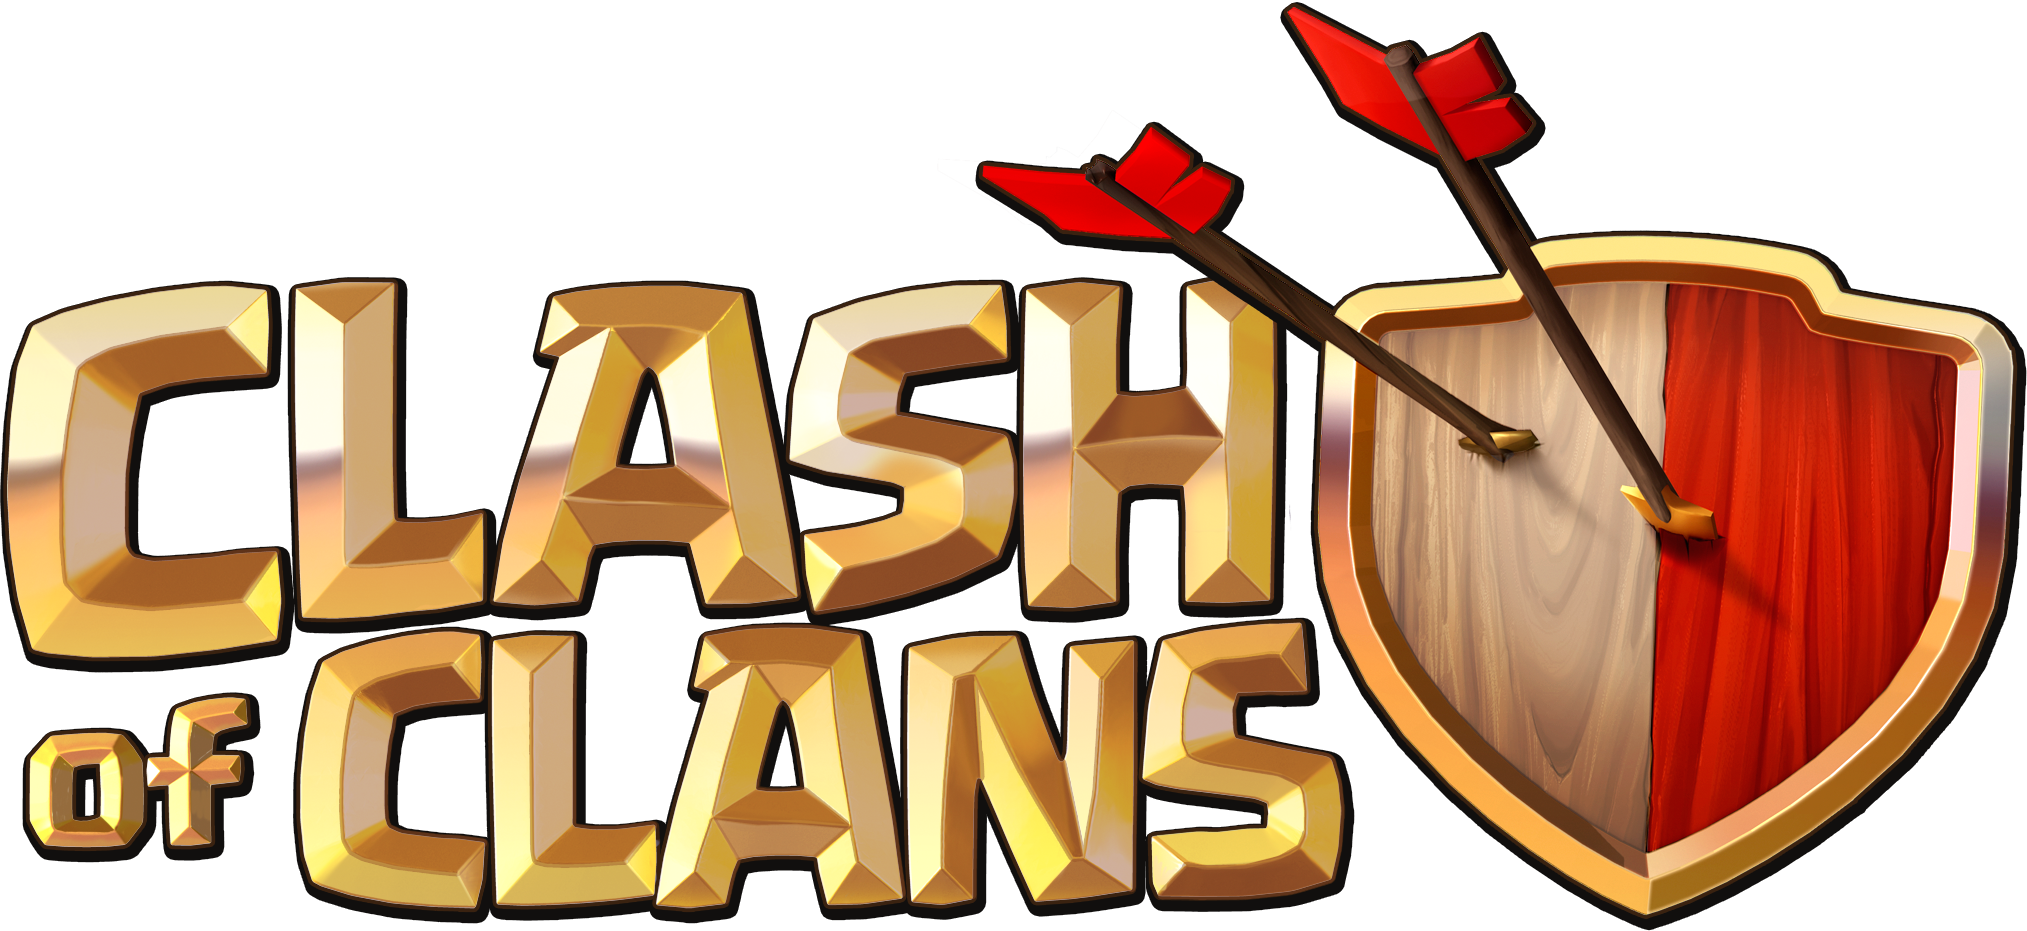 Clash Of Clans Is A Mobile Spin Off Of League Of Legends - Clans Of Clans Logo (2027x931)